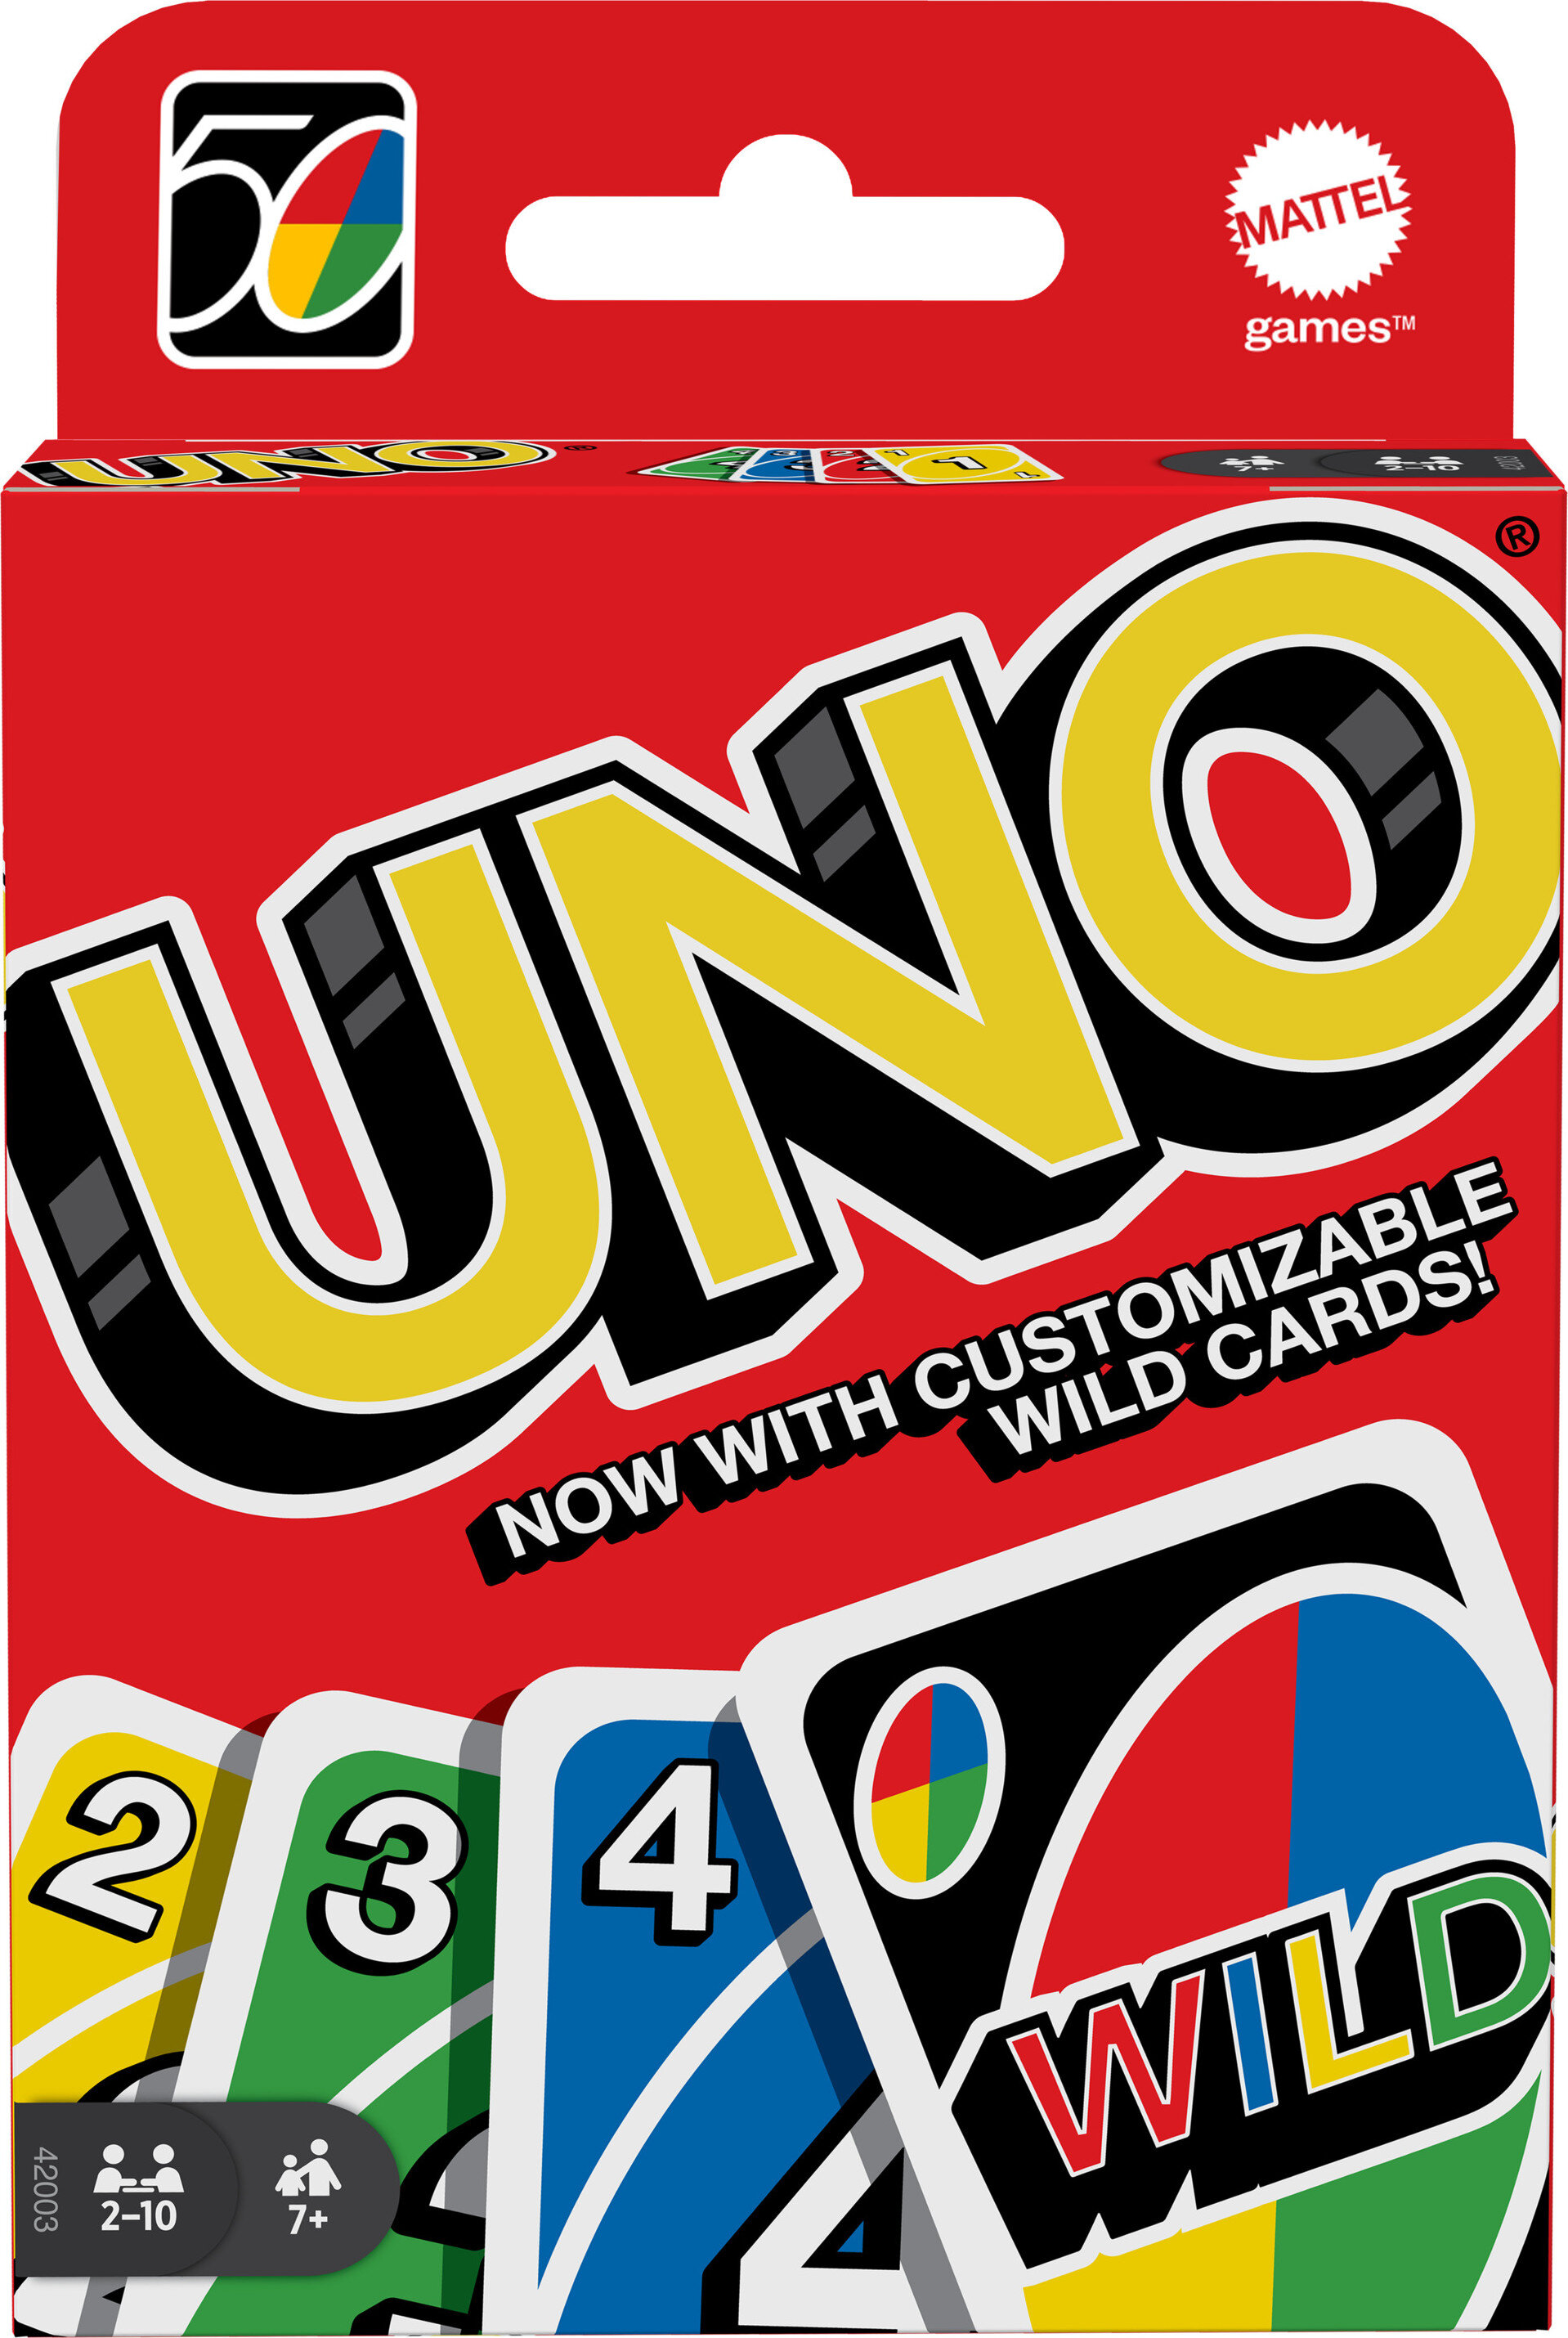 UNO Card Game for Kids, Adults & Family Game Night, Original UNO Game of Matching Colors & Numbers - image 1 of 7